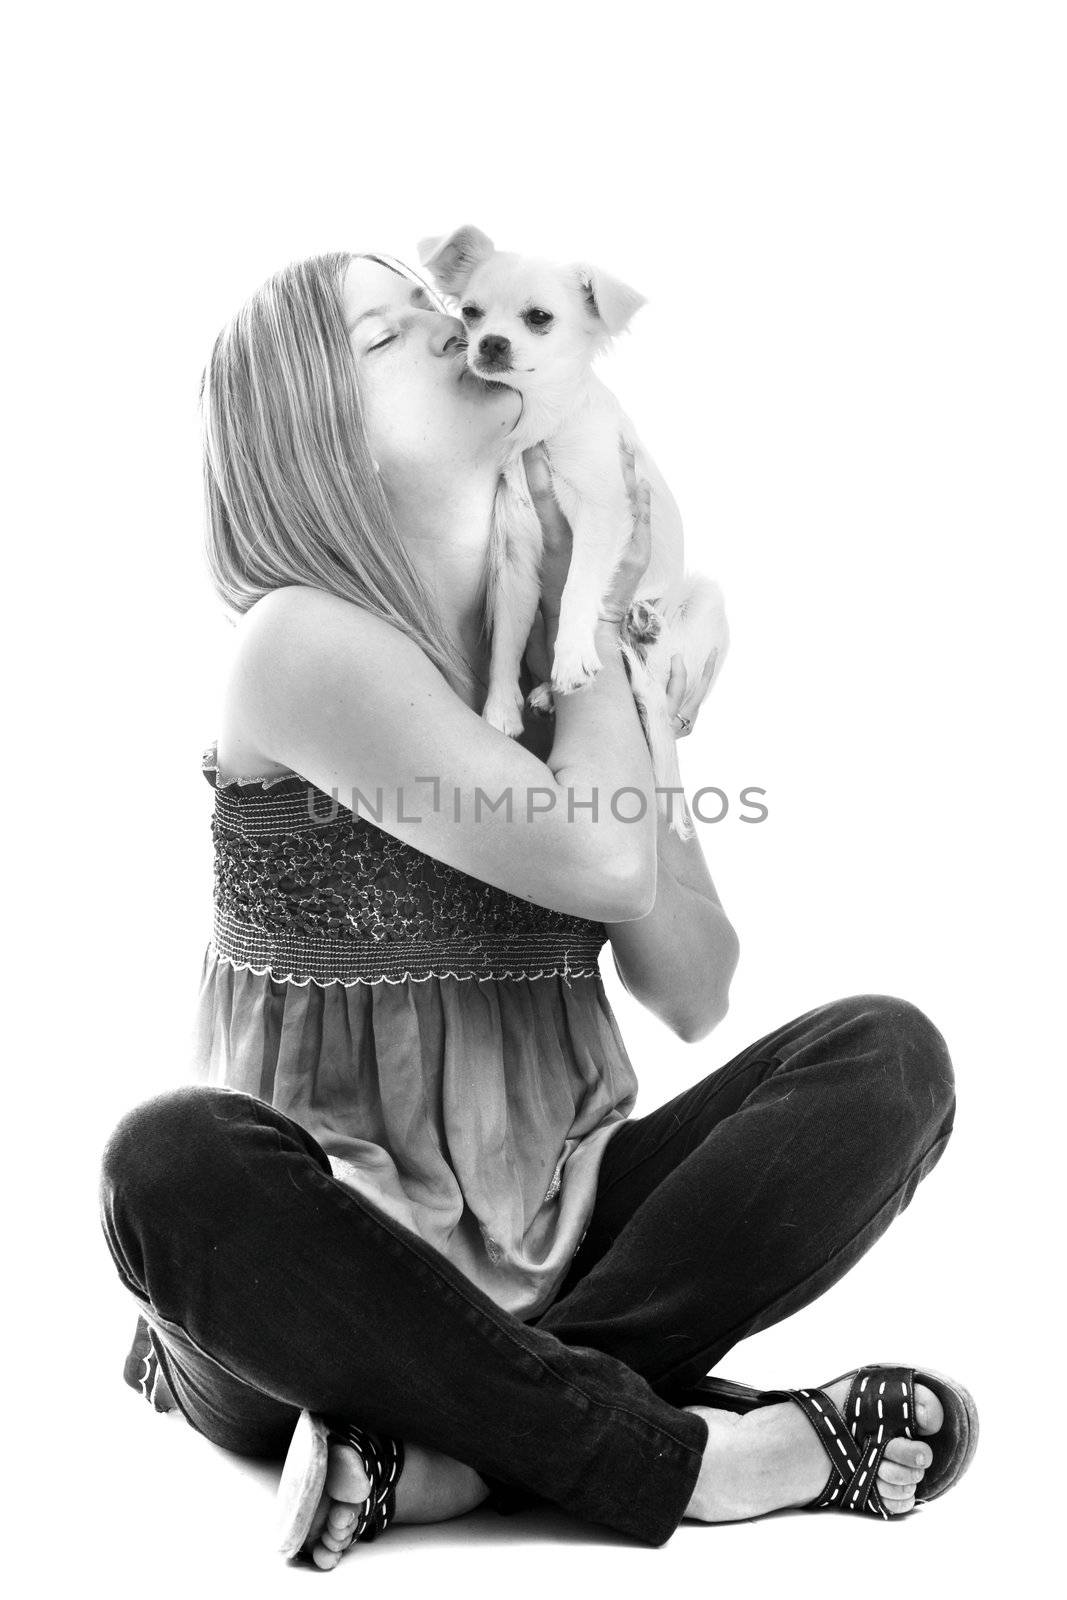 portrait of a woman and puppy chihuahua in front of white background